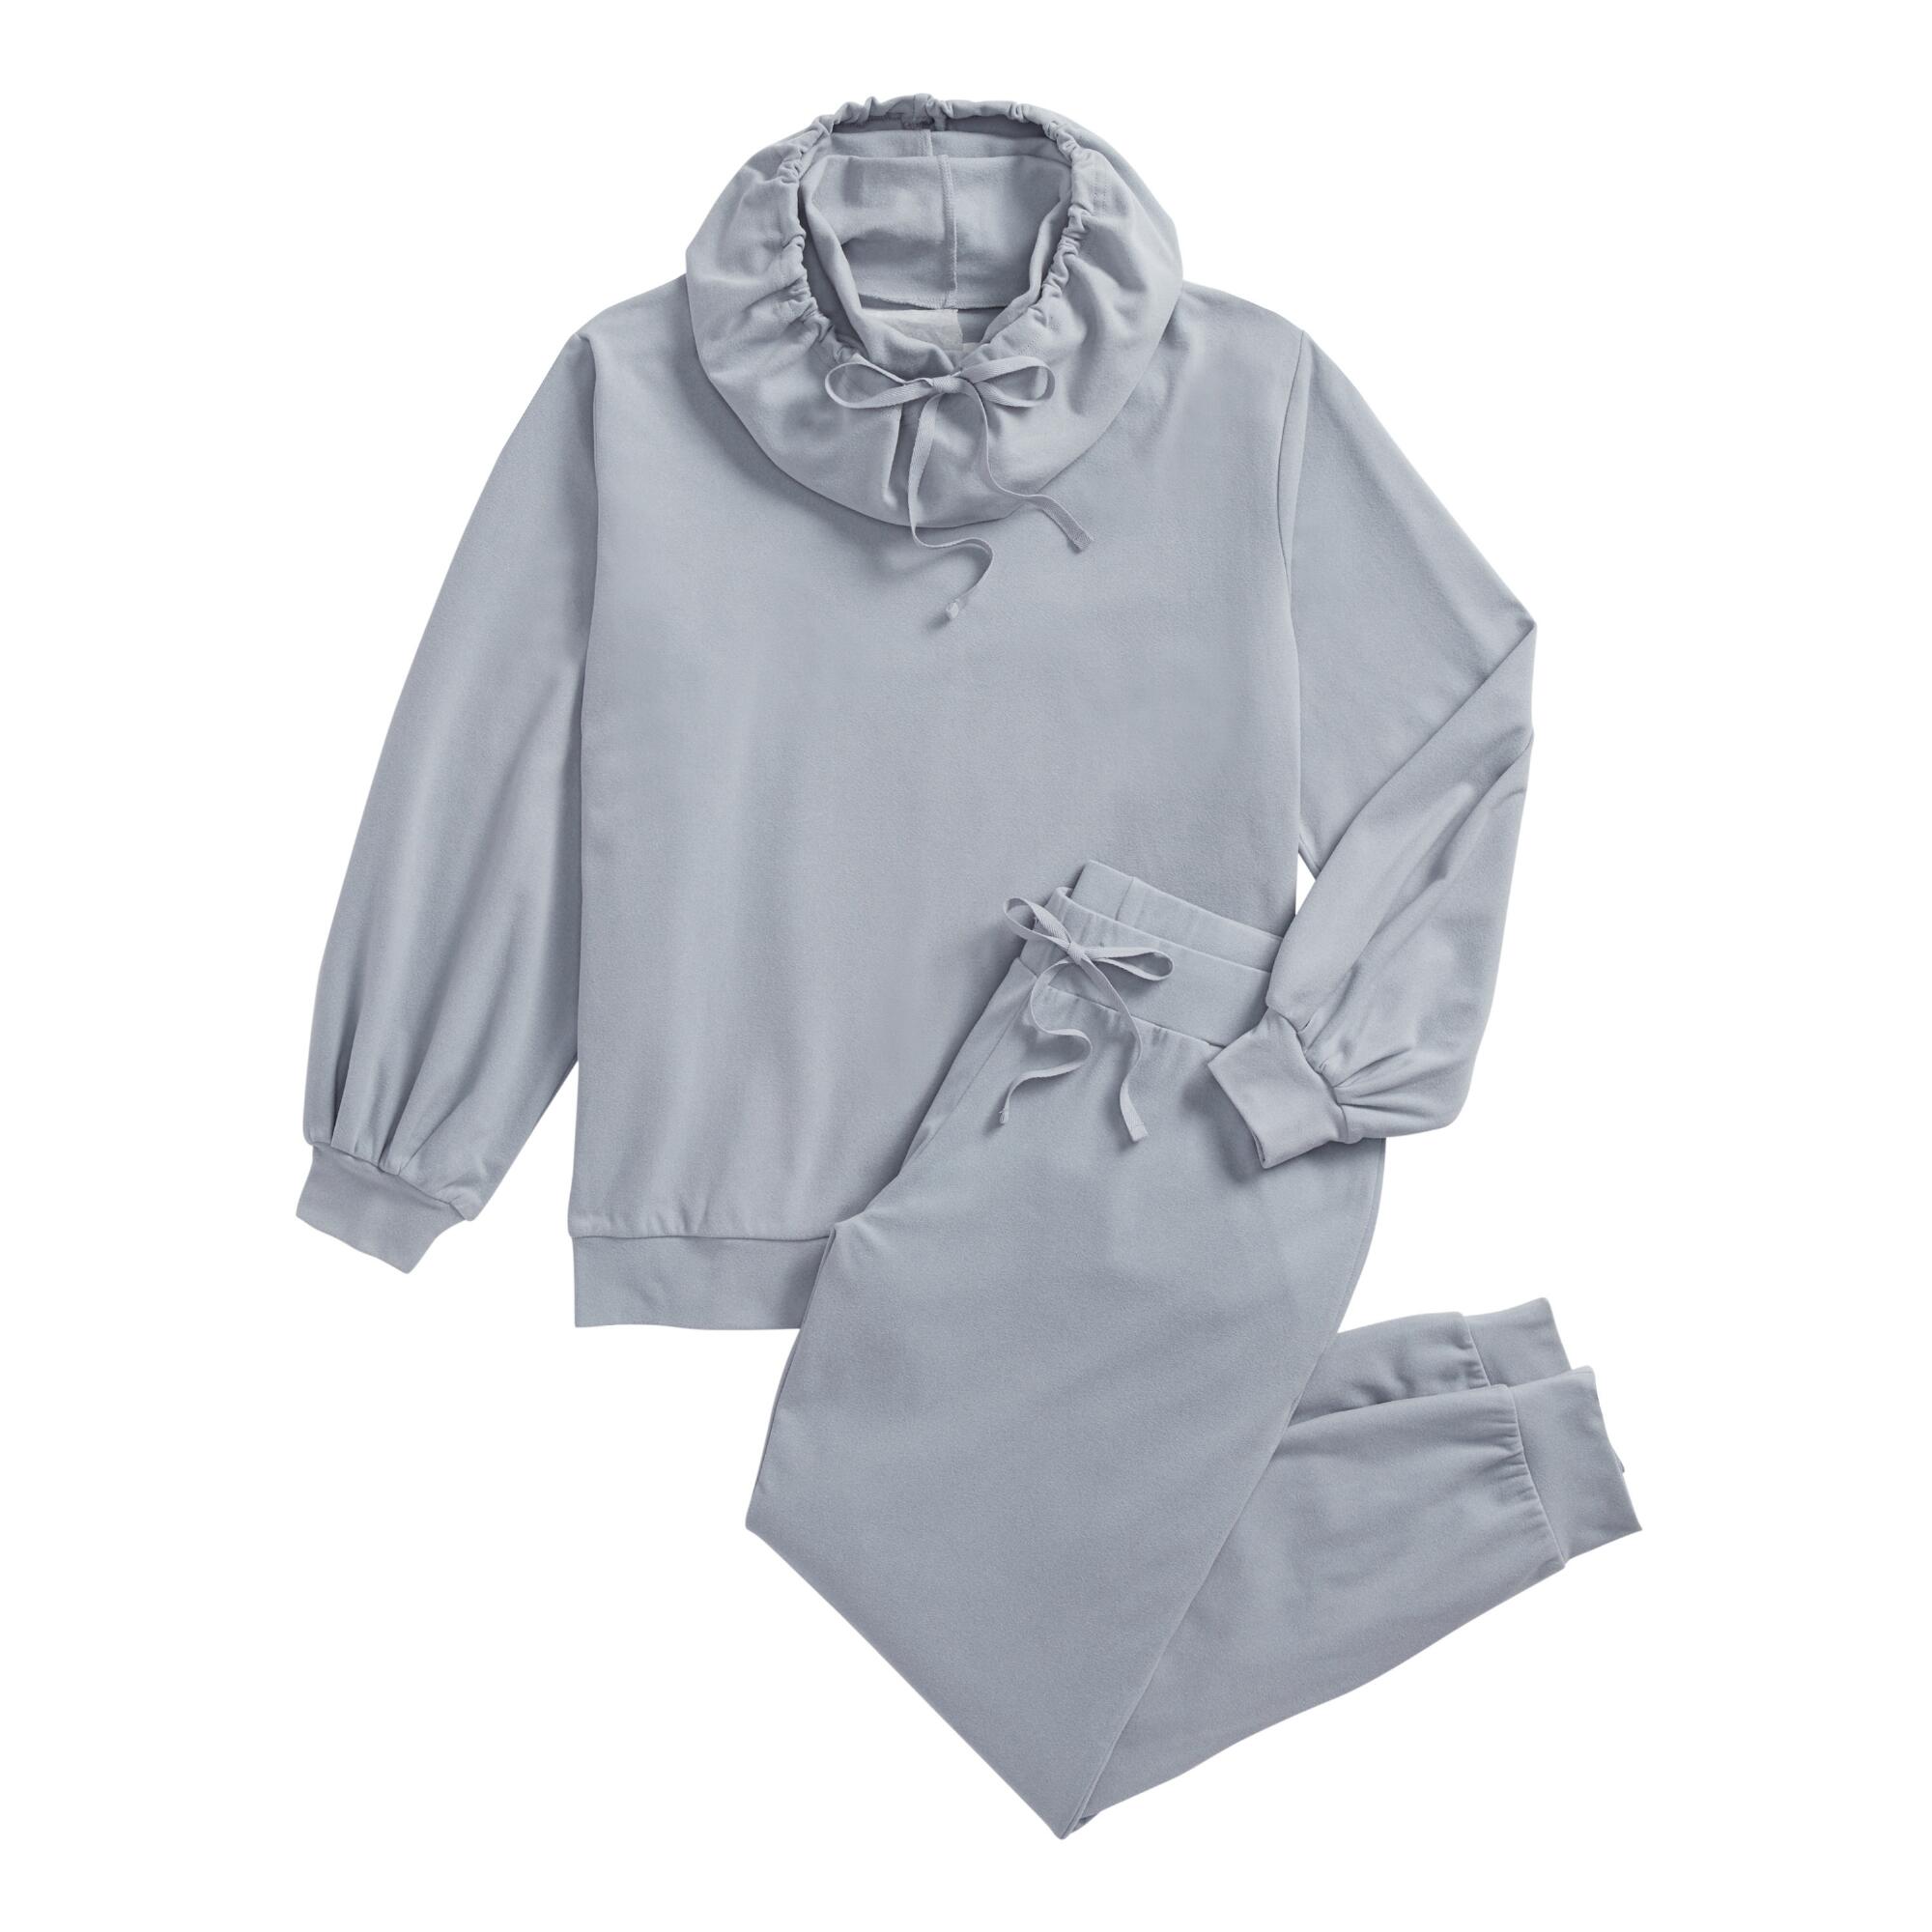 Light Blue Loungewear Collection by World Market